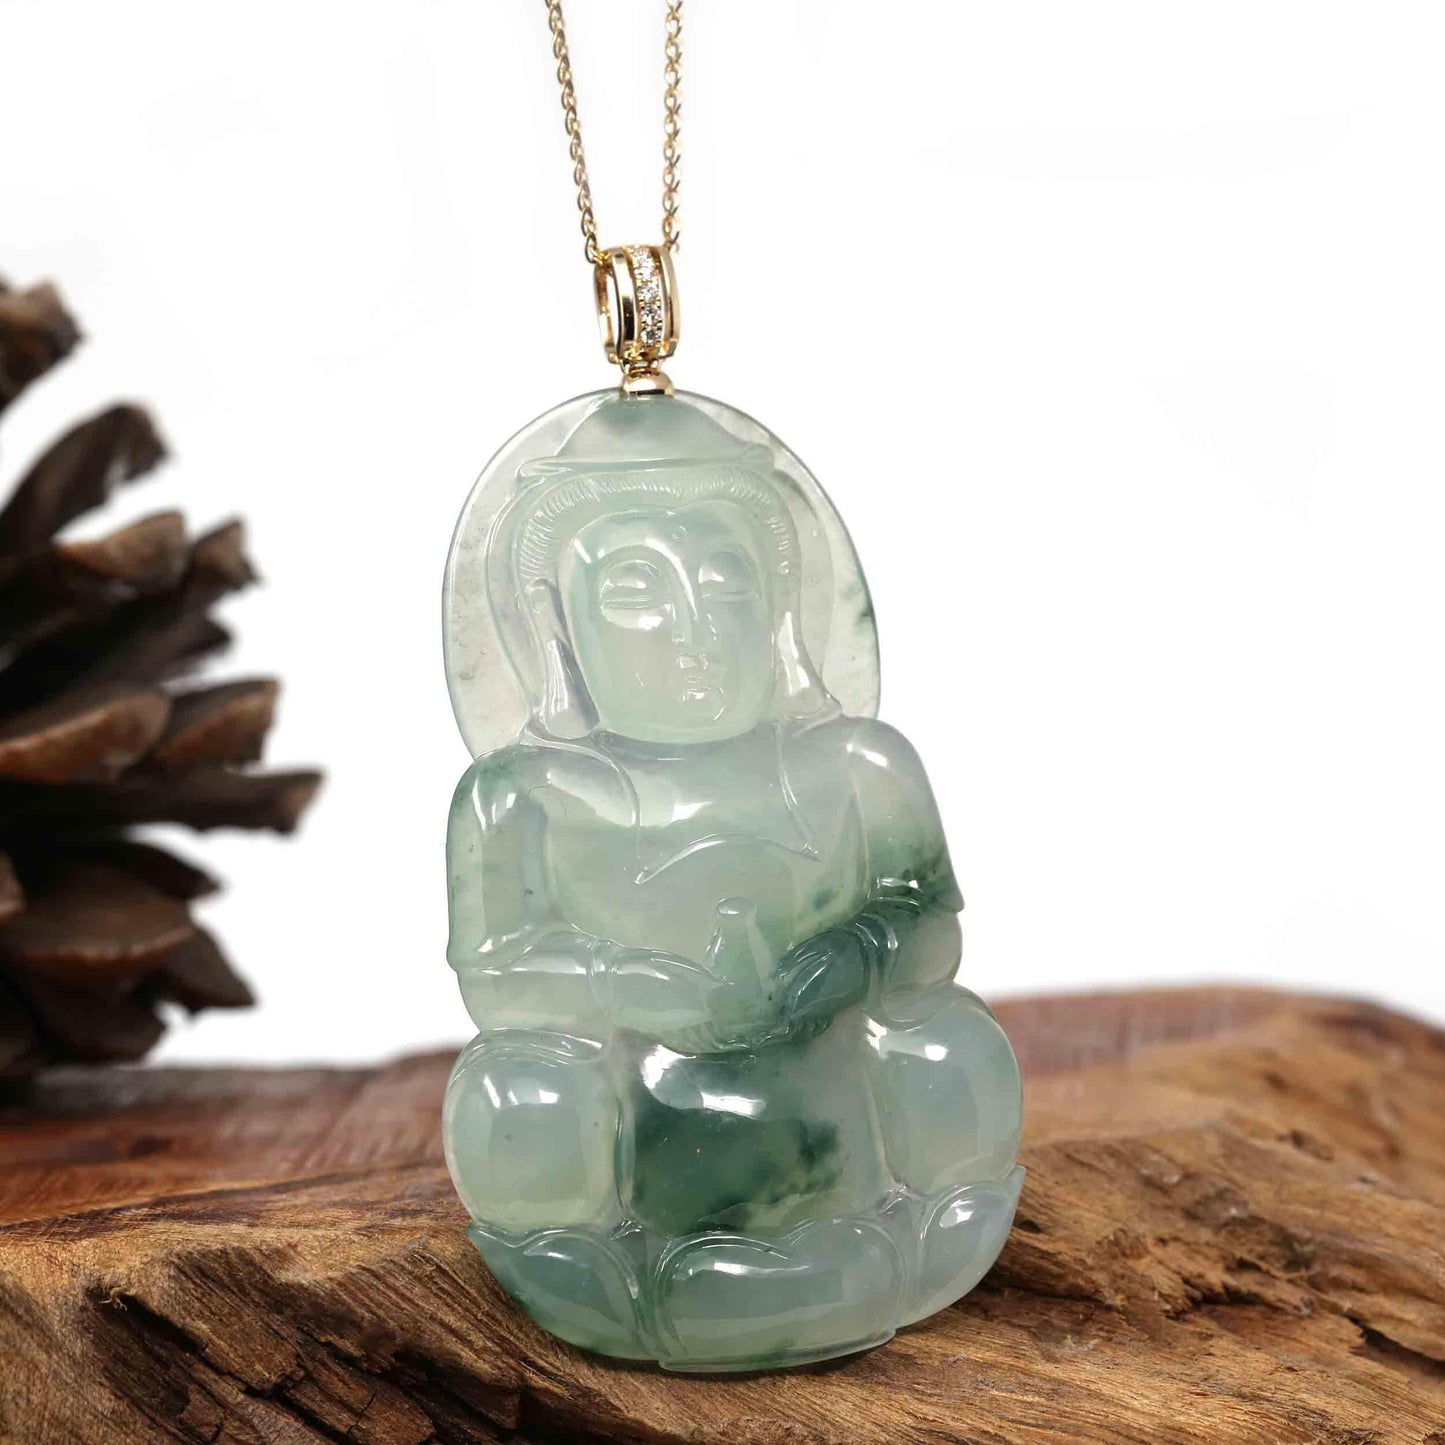 RealJade Co. Jade Guanyin Pendant Necklace Copy of RealJade Co. 14k Yellow Gold "Goddess of Compassion" Genuine Ice Burmese Jadeite Jade Guanyin Necklace With Gold Bail